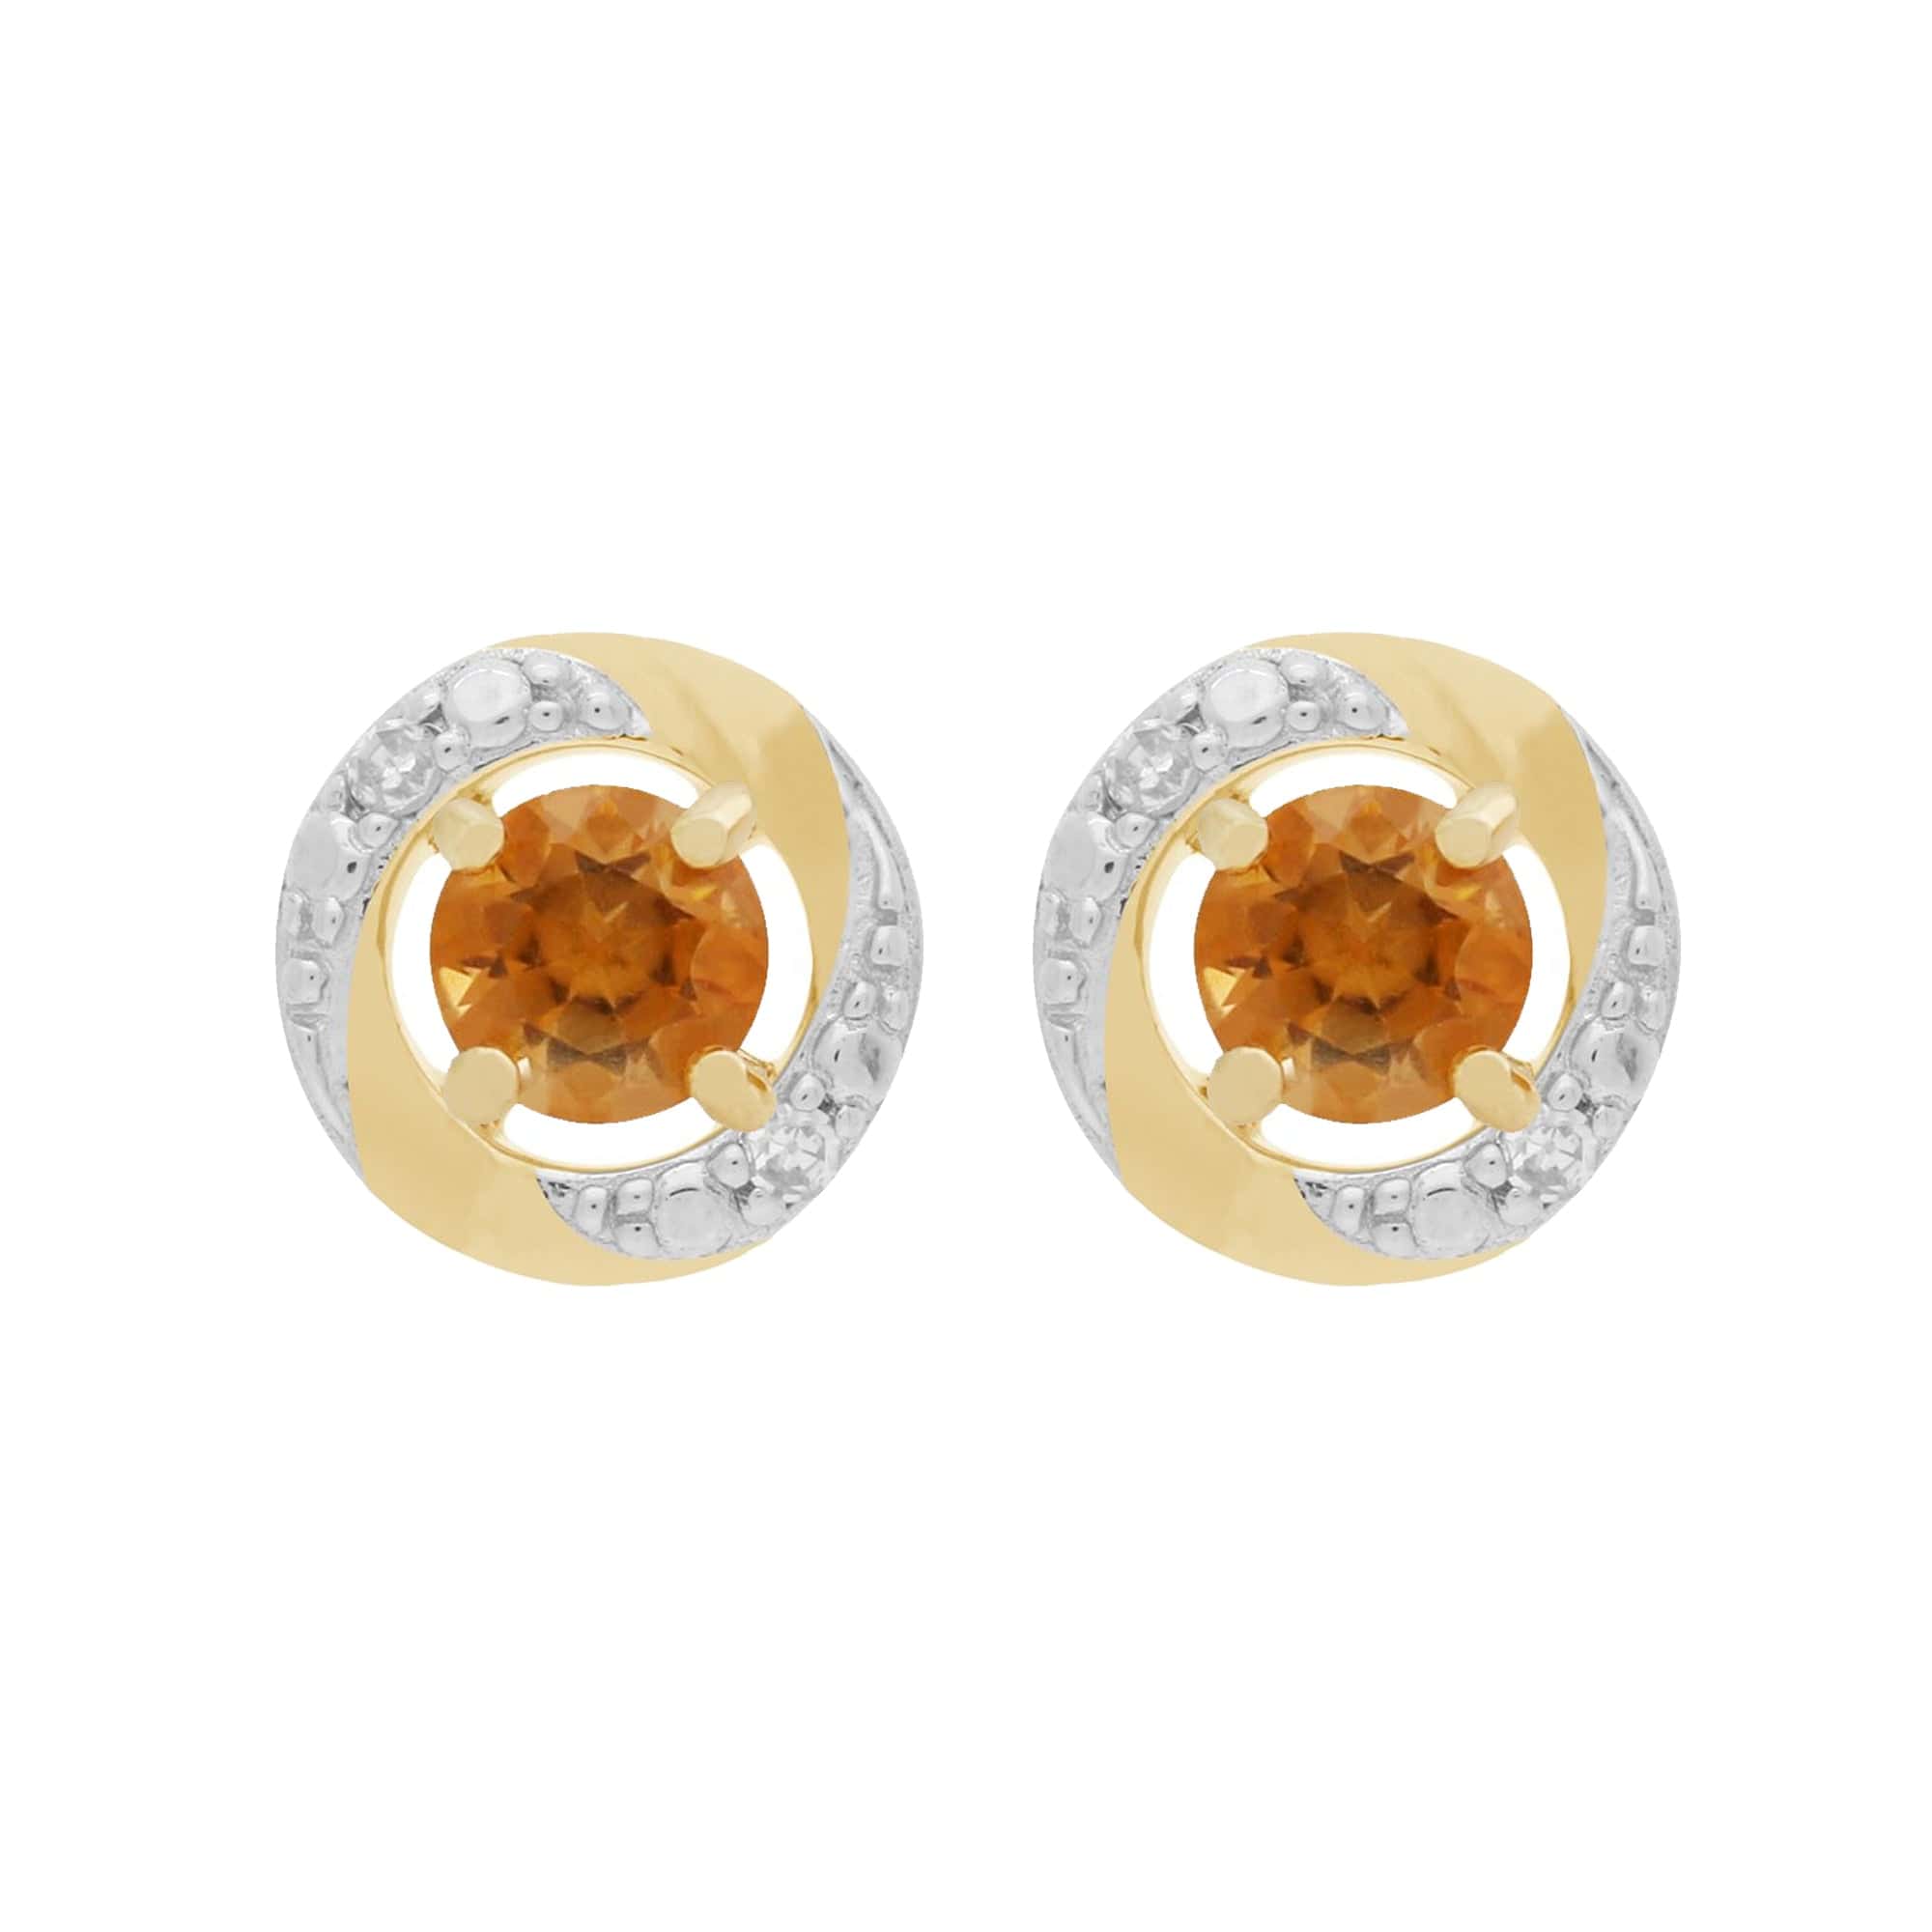 183E0083139-191E0374019 Classic Round Citrine Stud Earrings with Detachable Diamond Halo Ear Jacket in 9ct Yellow Gold 1